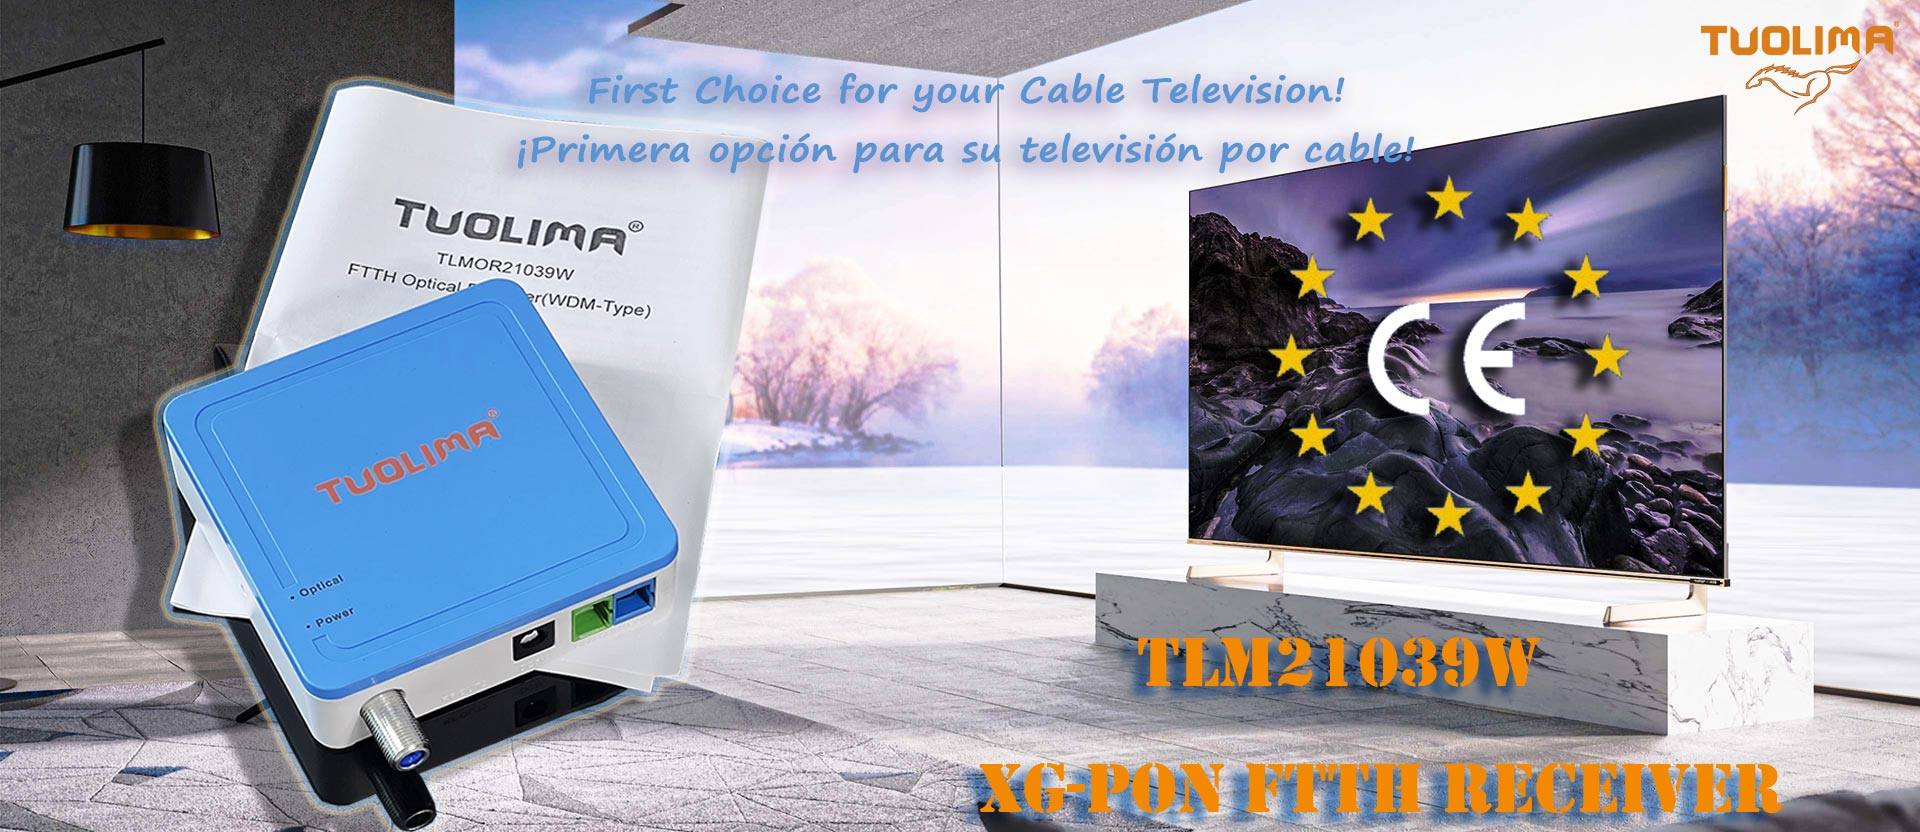 TUOLIMA Group Helps You Build Fiber Networks